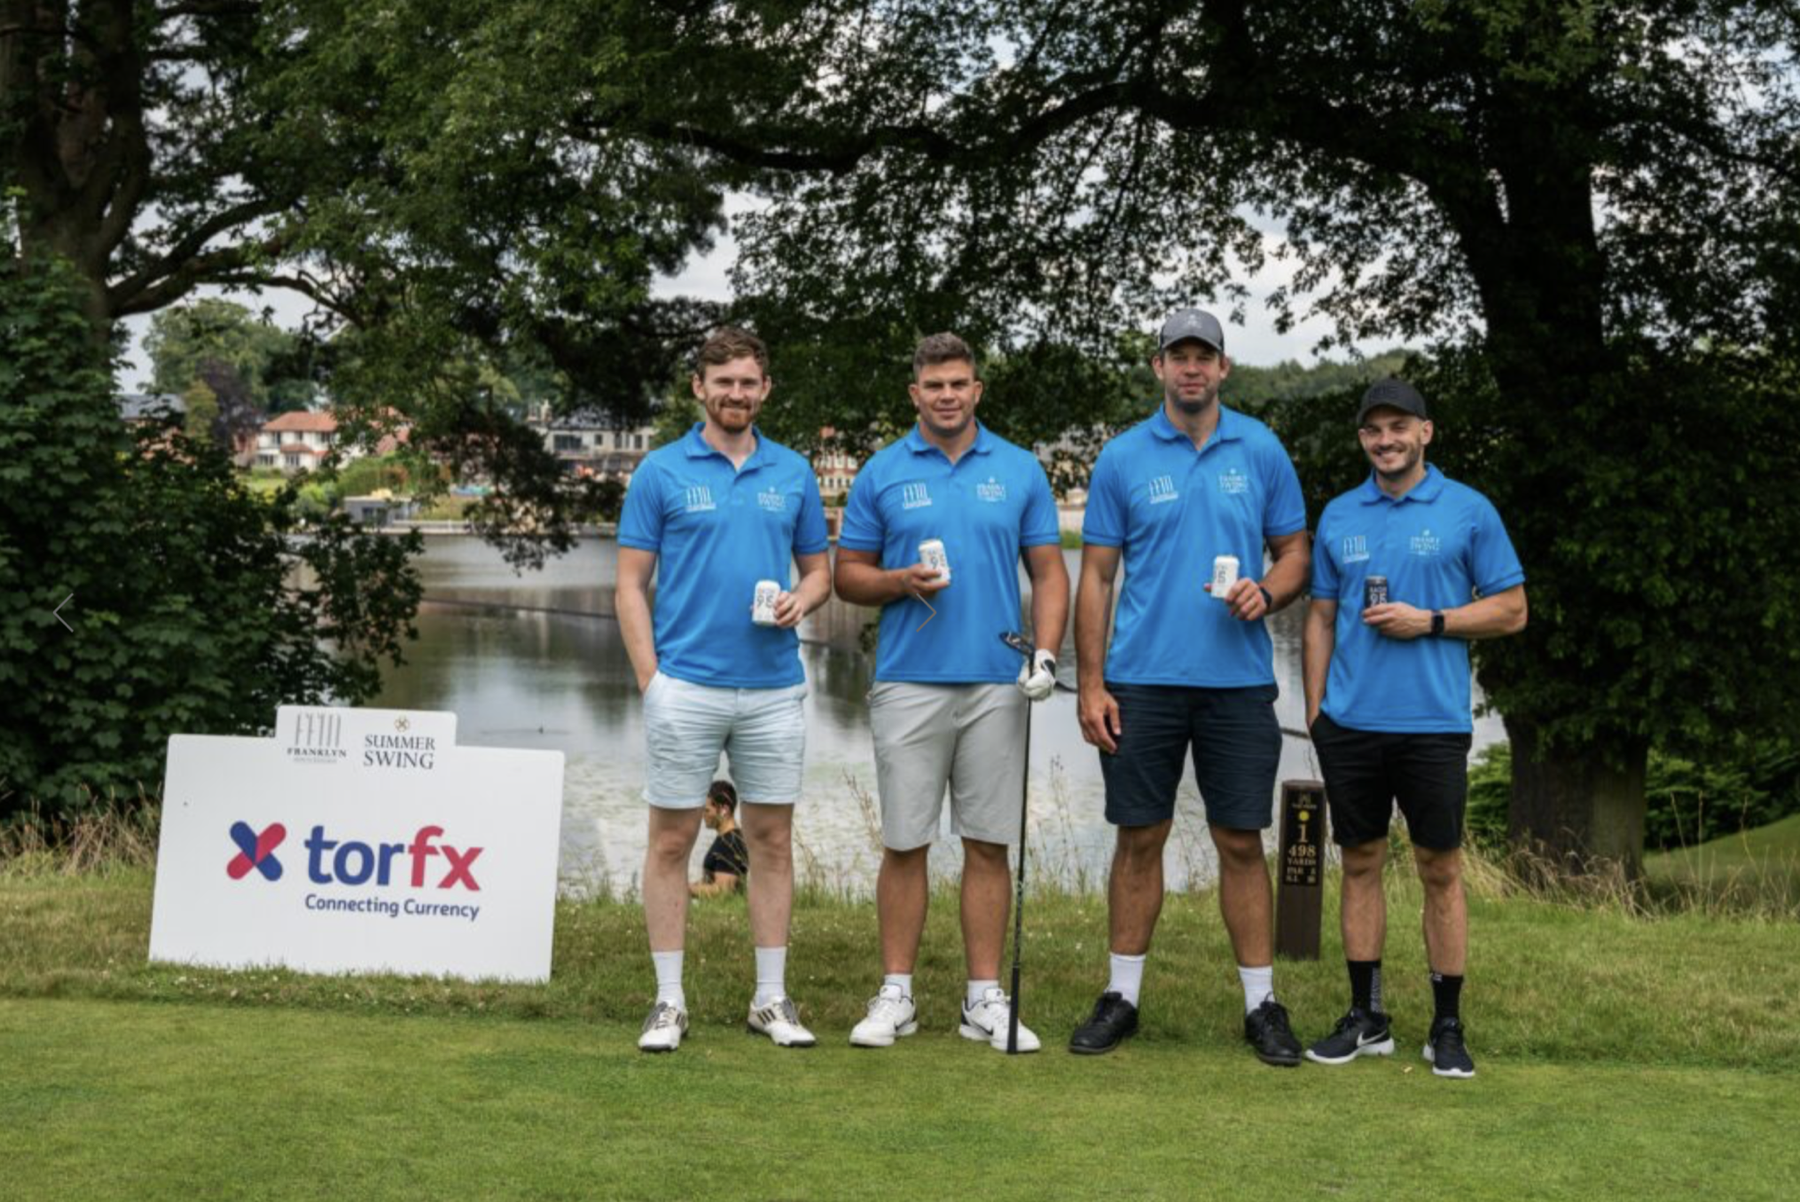  Sale Sharks players, Simon Hammersley, Jono Ross, Josh Beaumont and Will Cliff, sporting their FFM Swanky Swing golf shirts whilst enjoying a can Bach95, the beer of choice for the day of the event which was co-founded by Will himself 